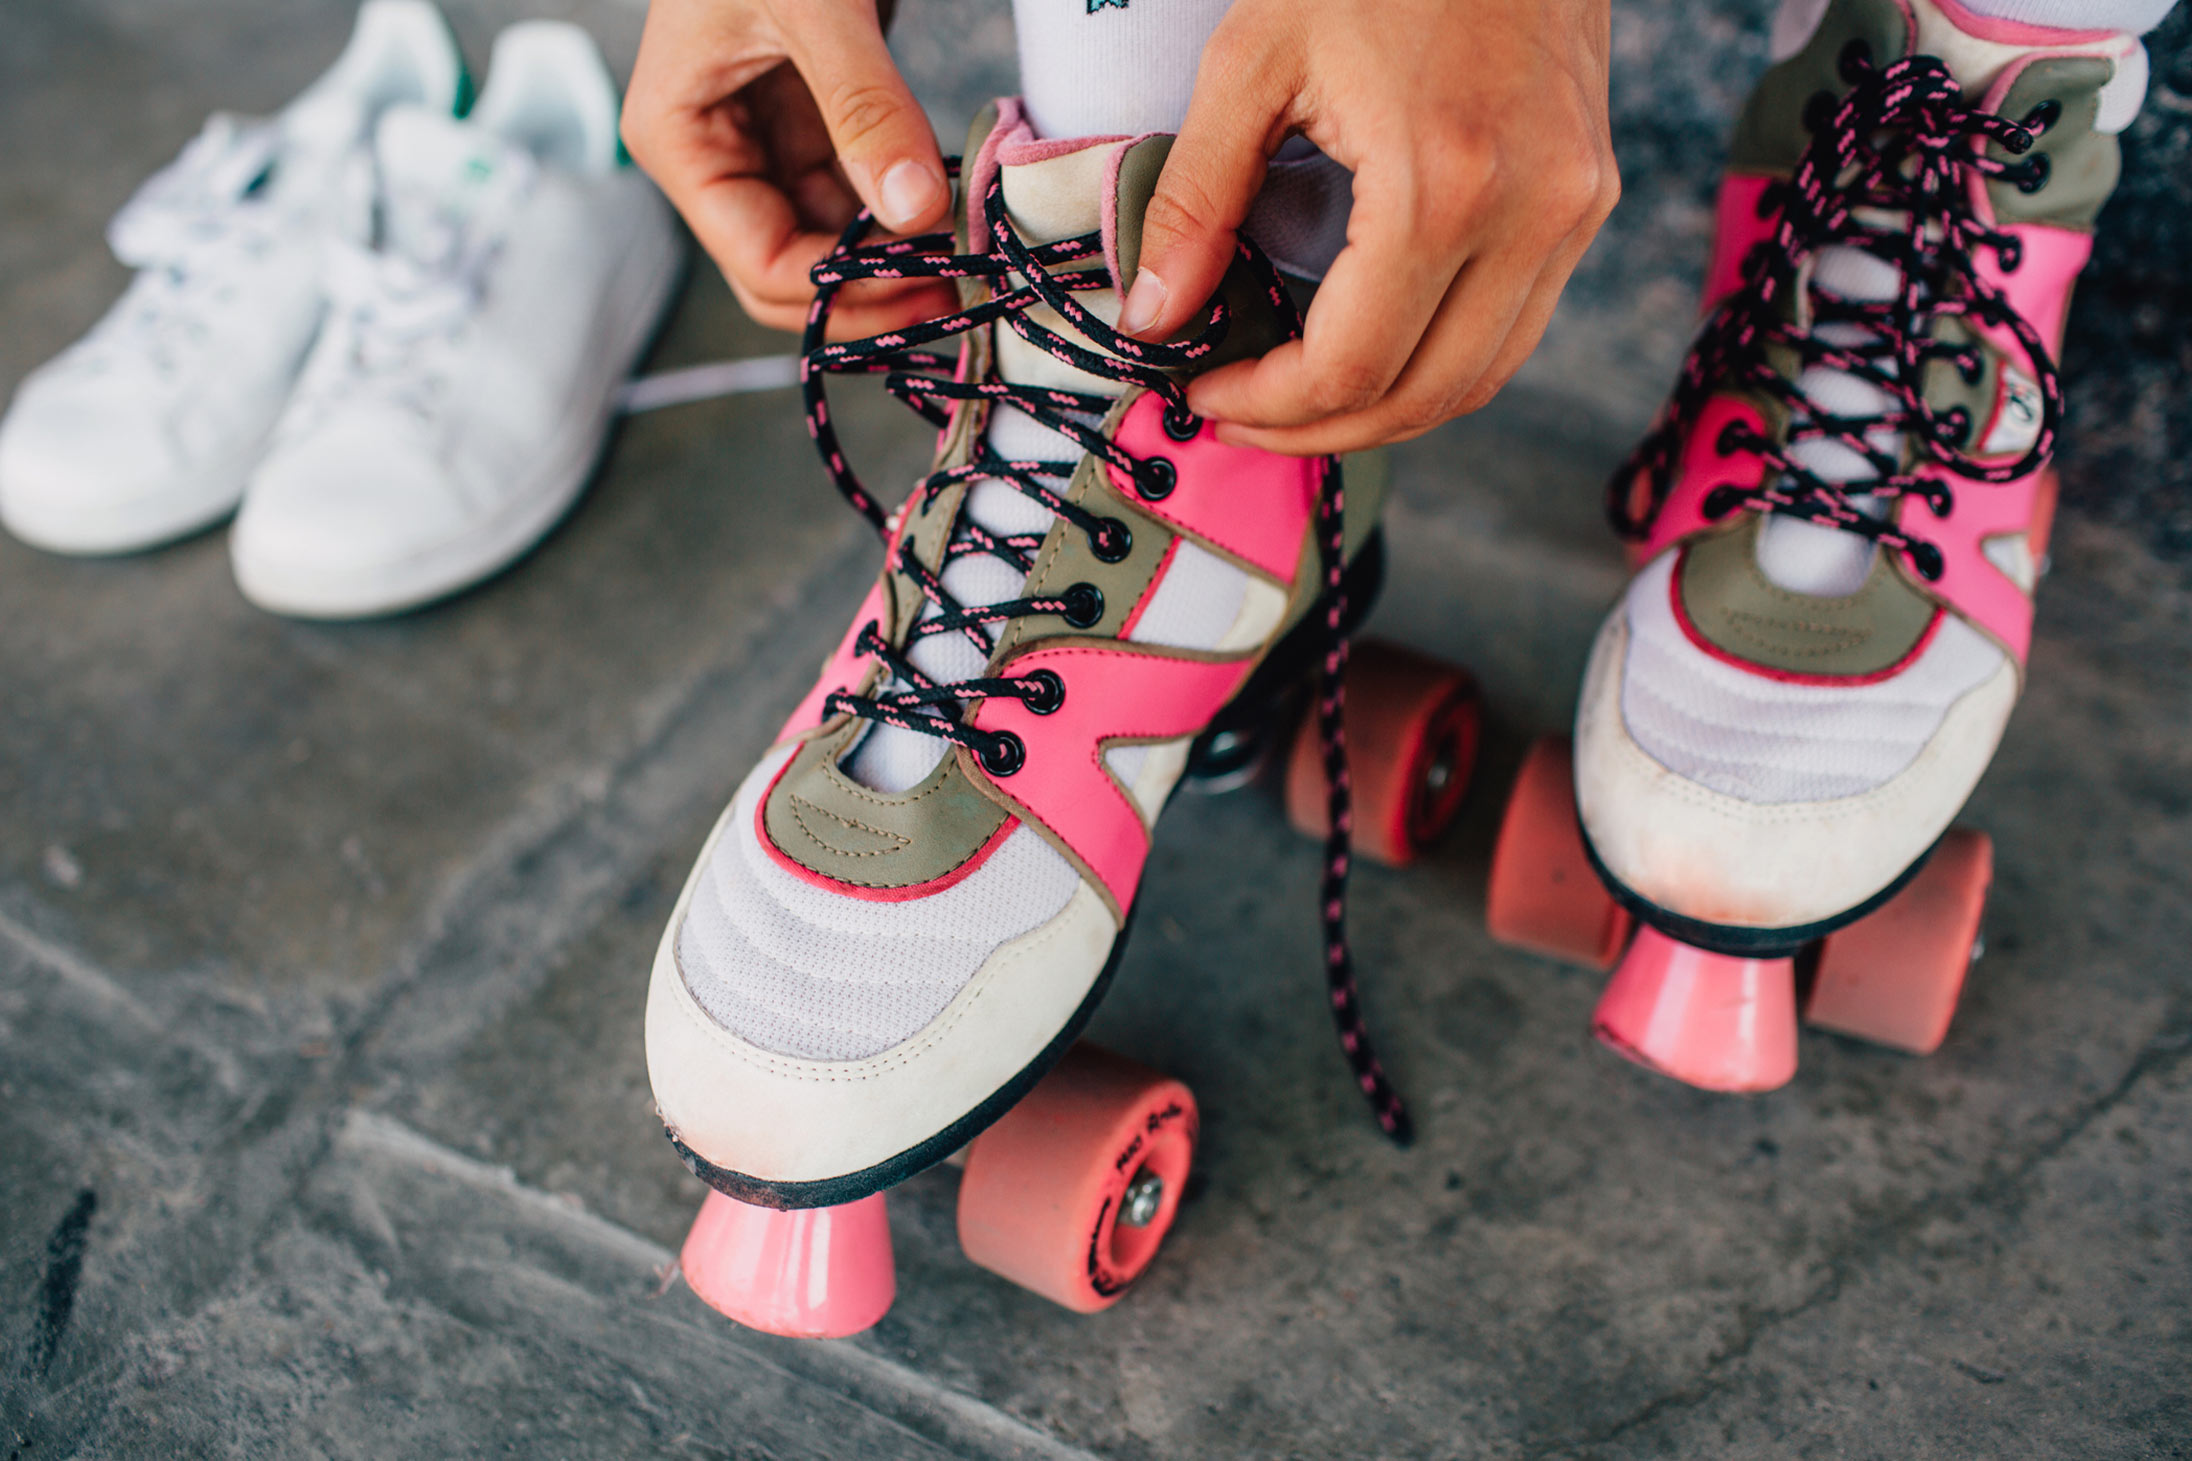 Roller skating as a new hobby for 2022